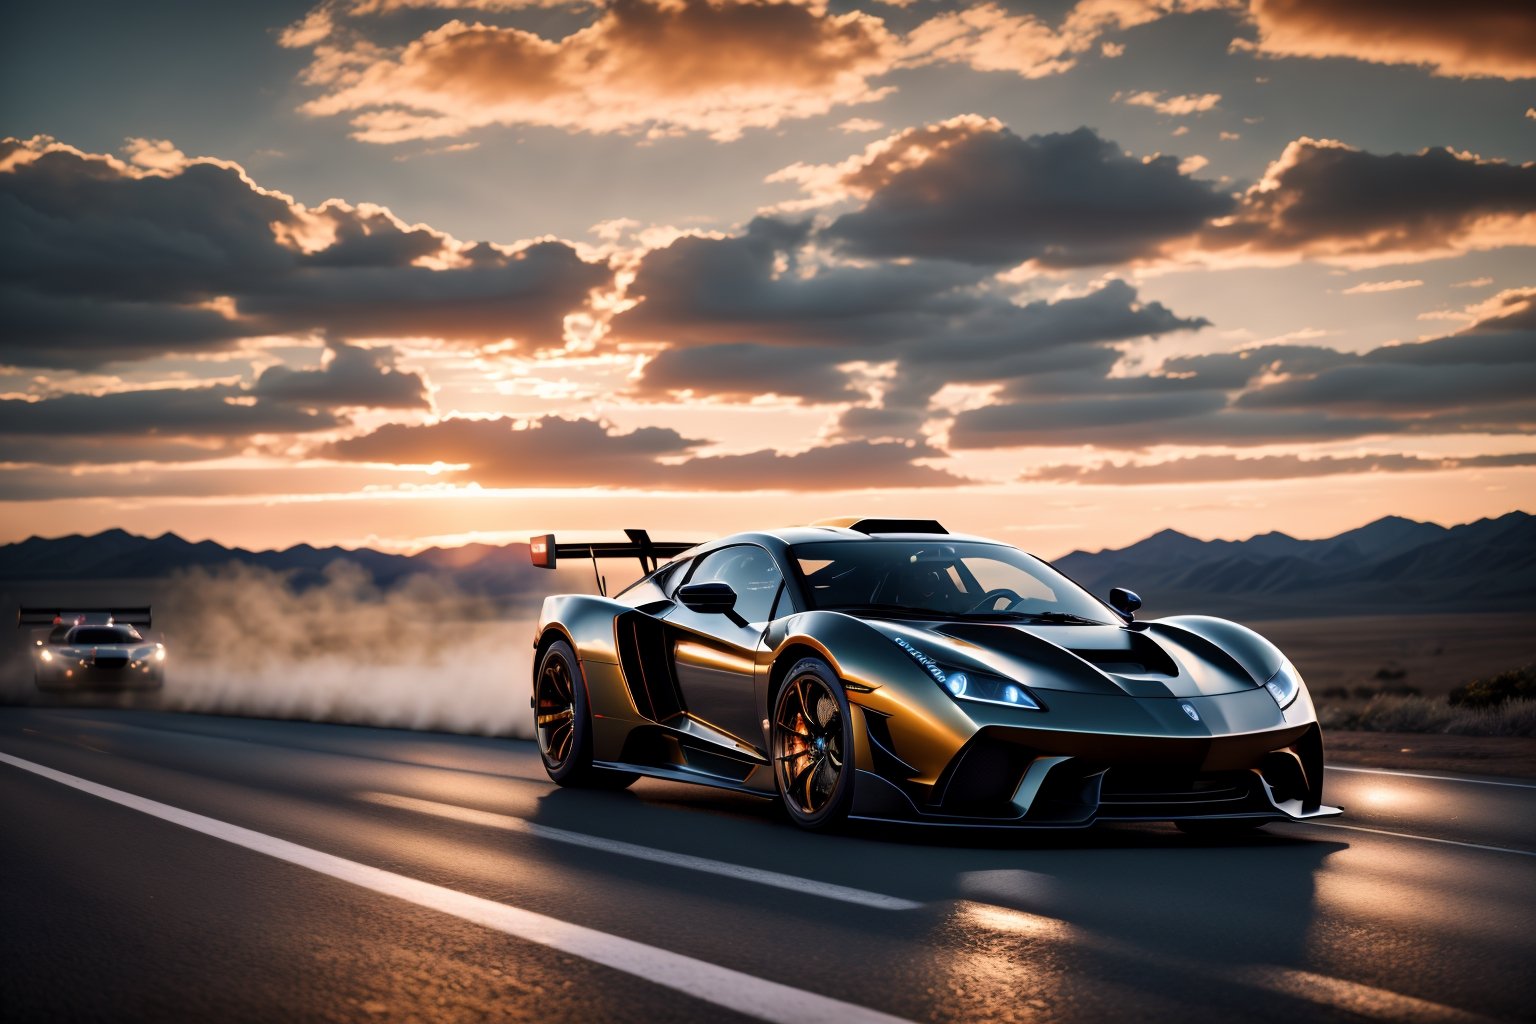 photo of a supercar, 8k uhd, high quality, road, sunset, motion blur, depth blur, cinematic, filmic image 4k, 8k with [George Miller's Mad Max style]. The image should be [ultra-realistic], with [high-resolution] captured in [natural light]. The lighting should create [soft shadows] and showcase the [raw] and [vibrant colors]